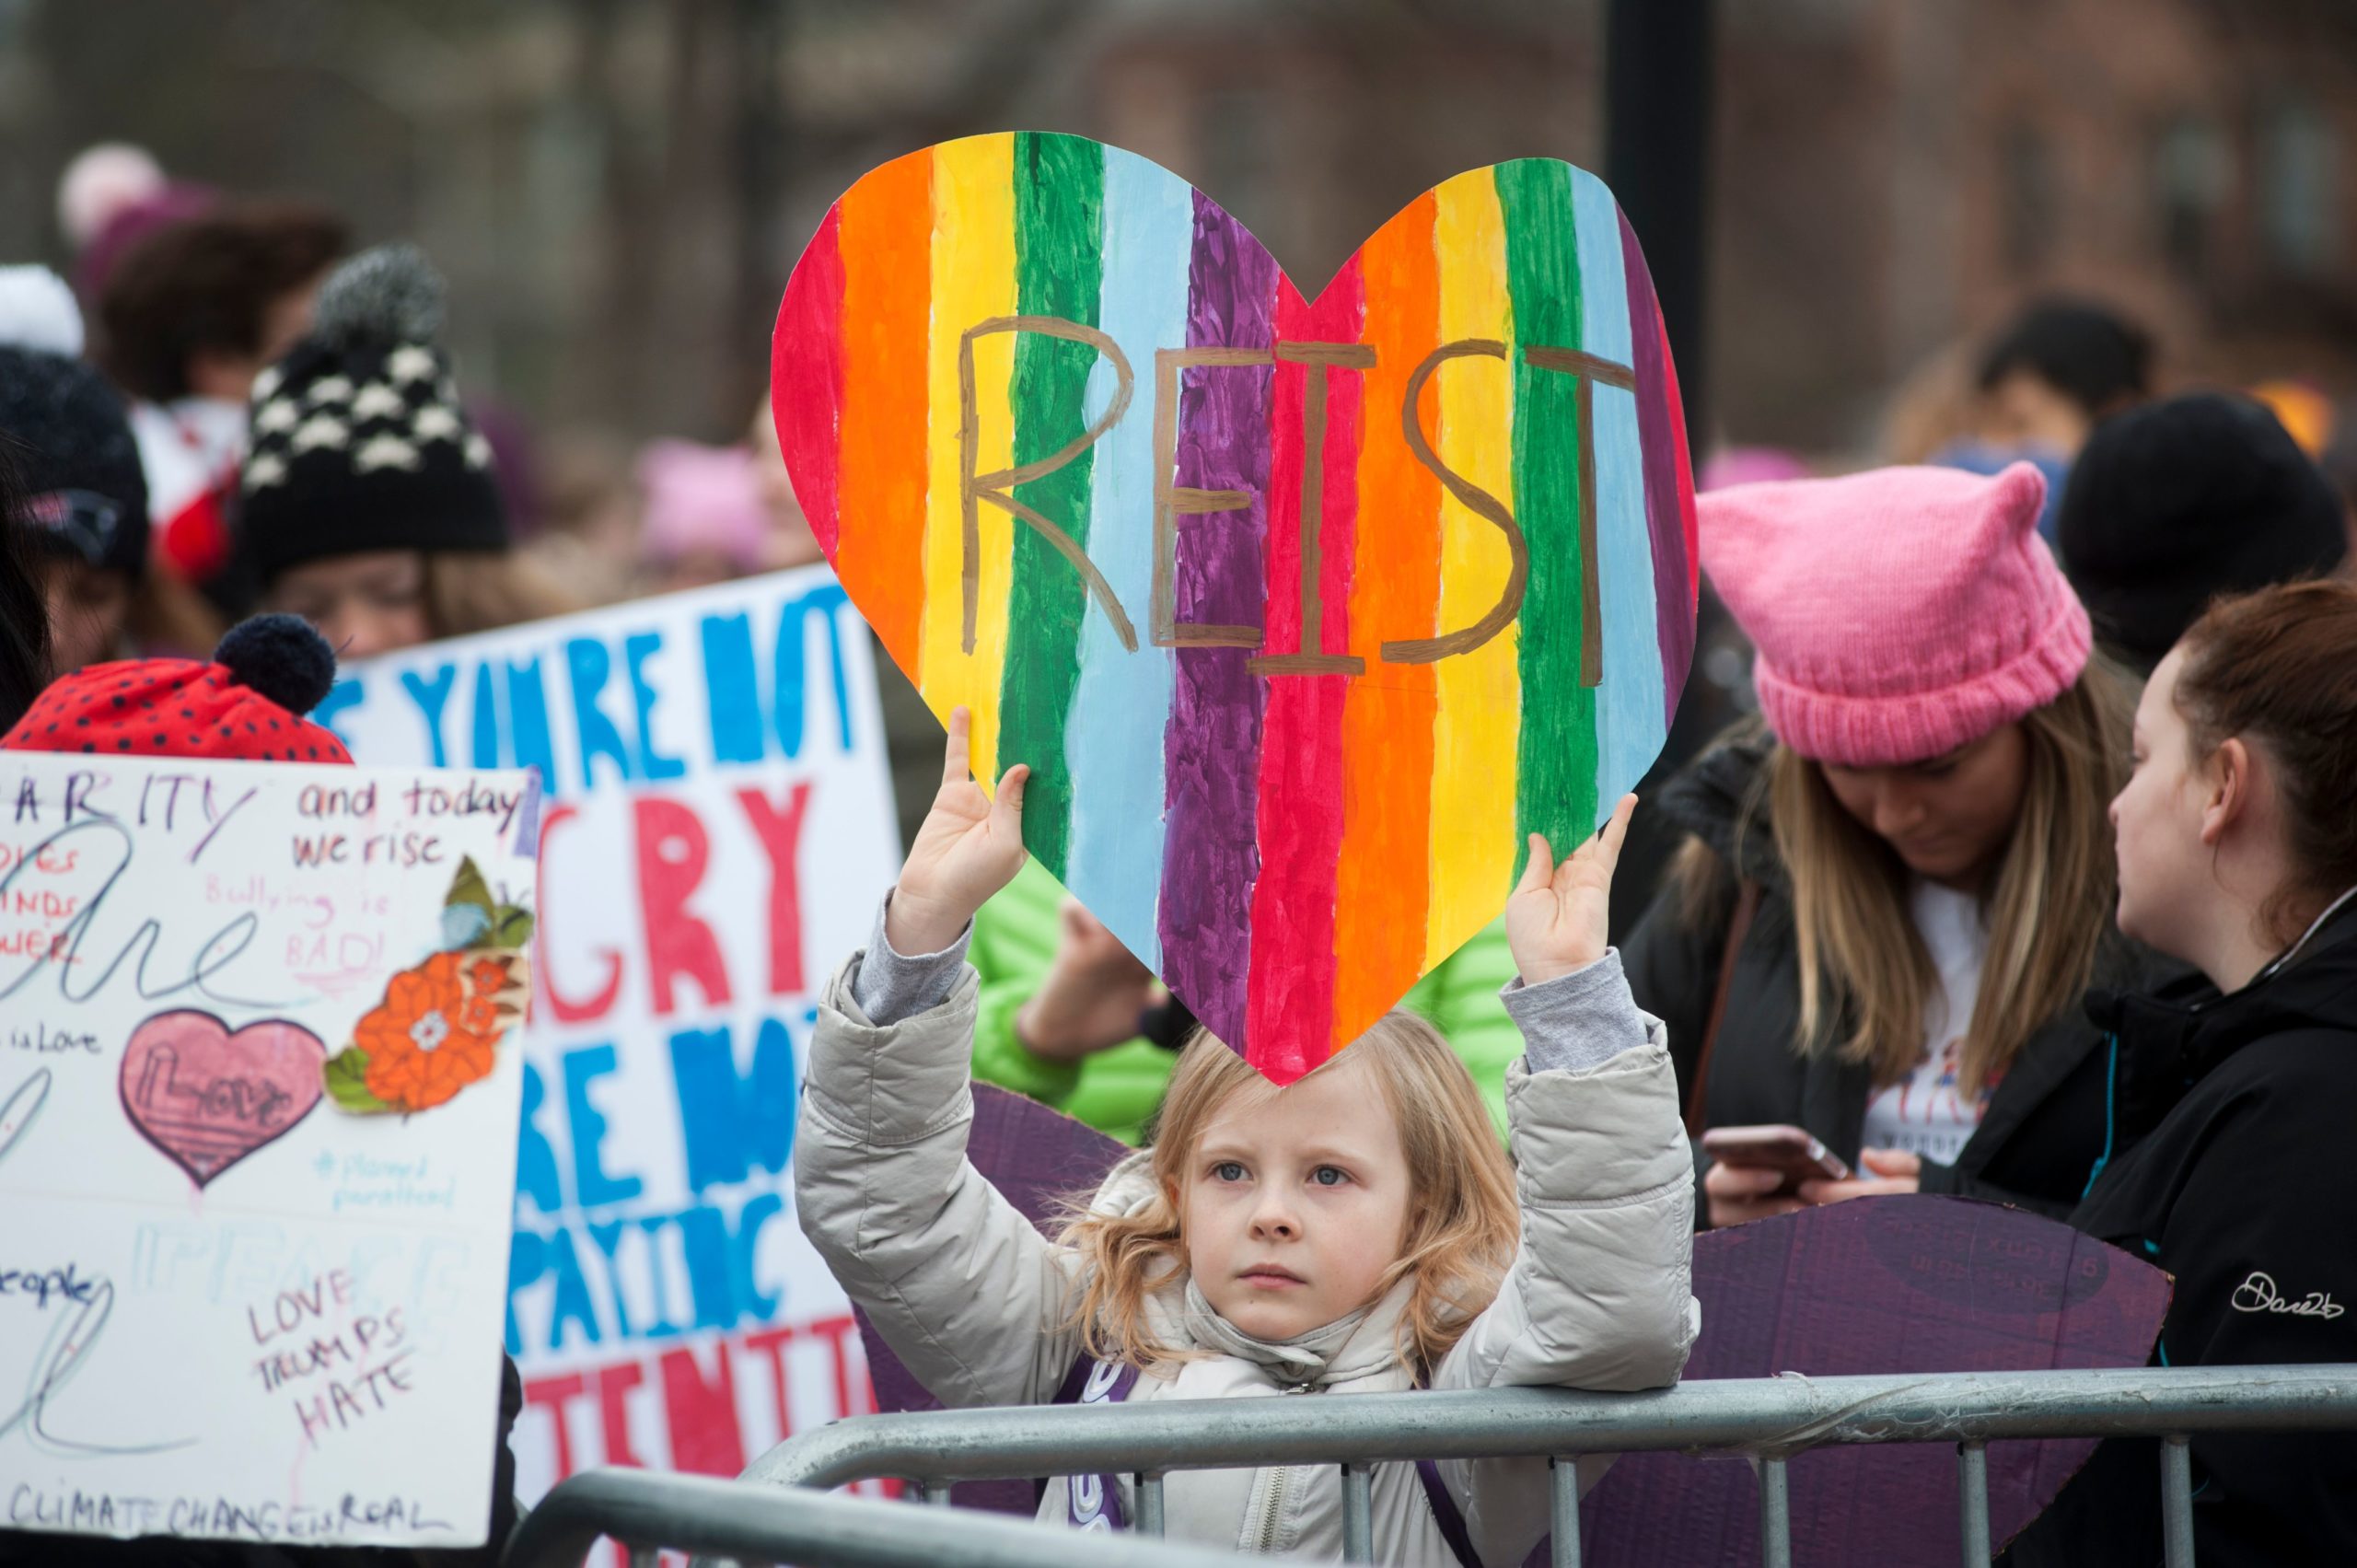 A girl holds up a sign during a rally attended by thousands of demonstrators at Cambridge Commons in Cambridge, Massachusetts on January 20, 2018, celebrating the one-year anniversary of the Women's March, when millions marched around the world in protest of US President Donald Trump's inauguration. / AFP PHOTO / RYAN MCBRIDE (Photo credit should read RYAN MCBRIDE/AFP via Getty Images)